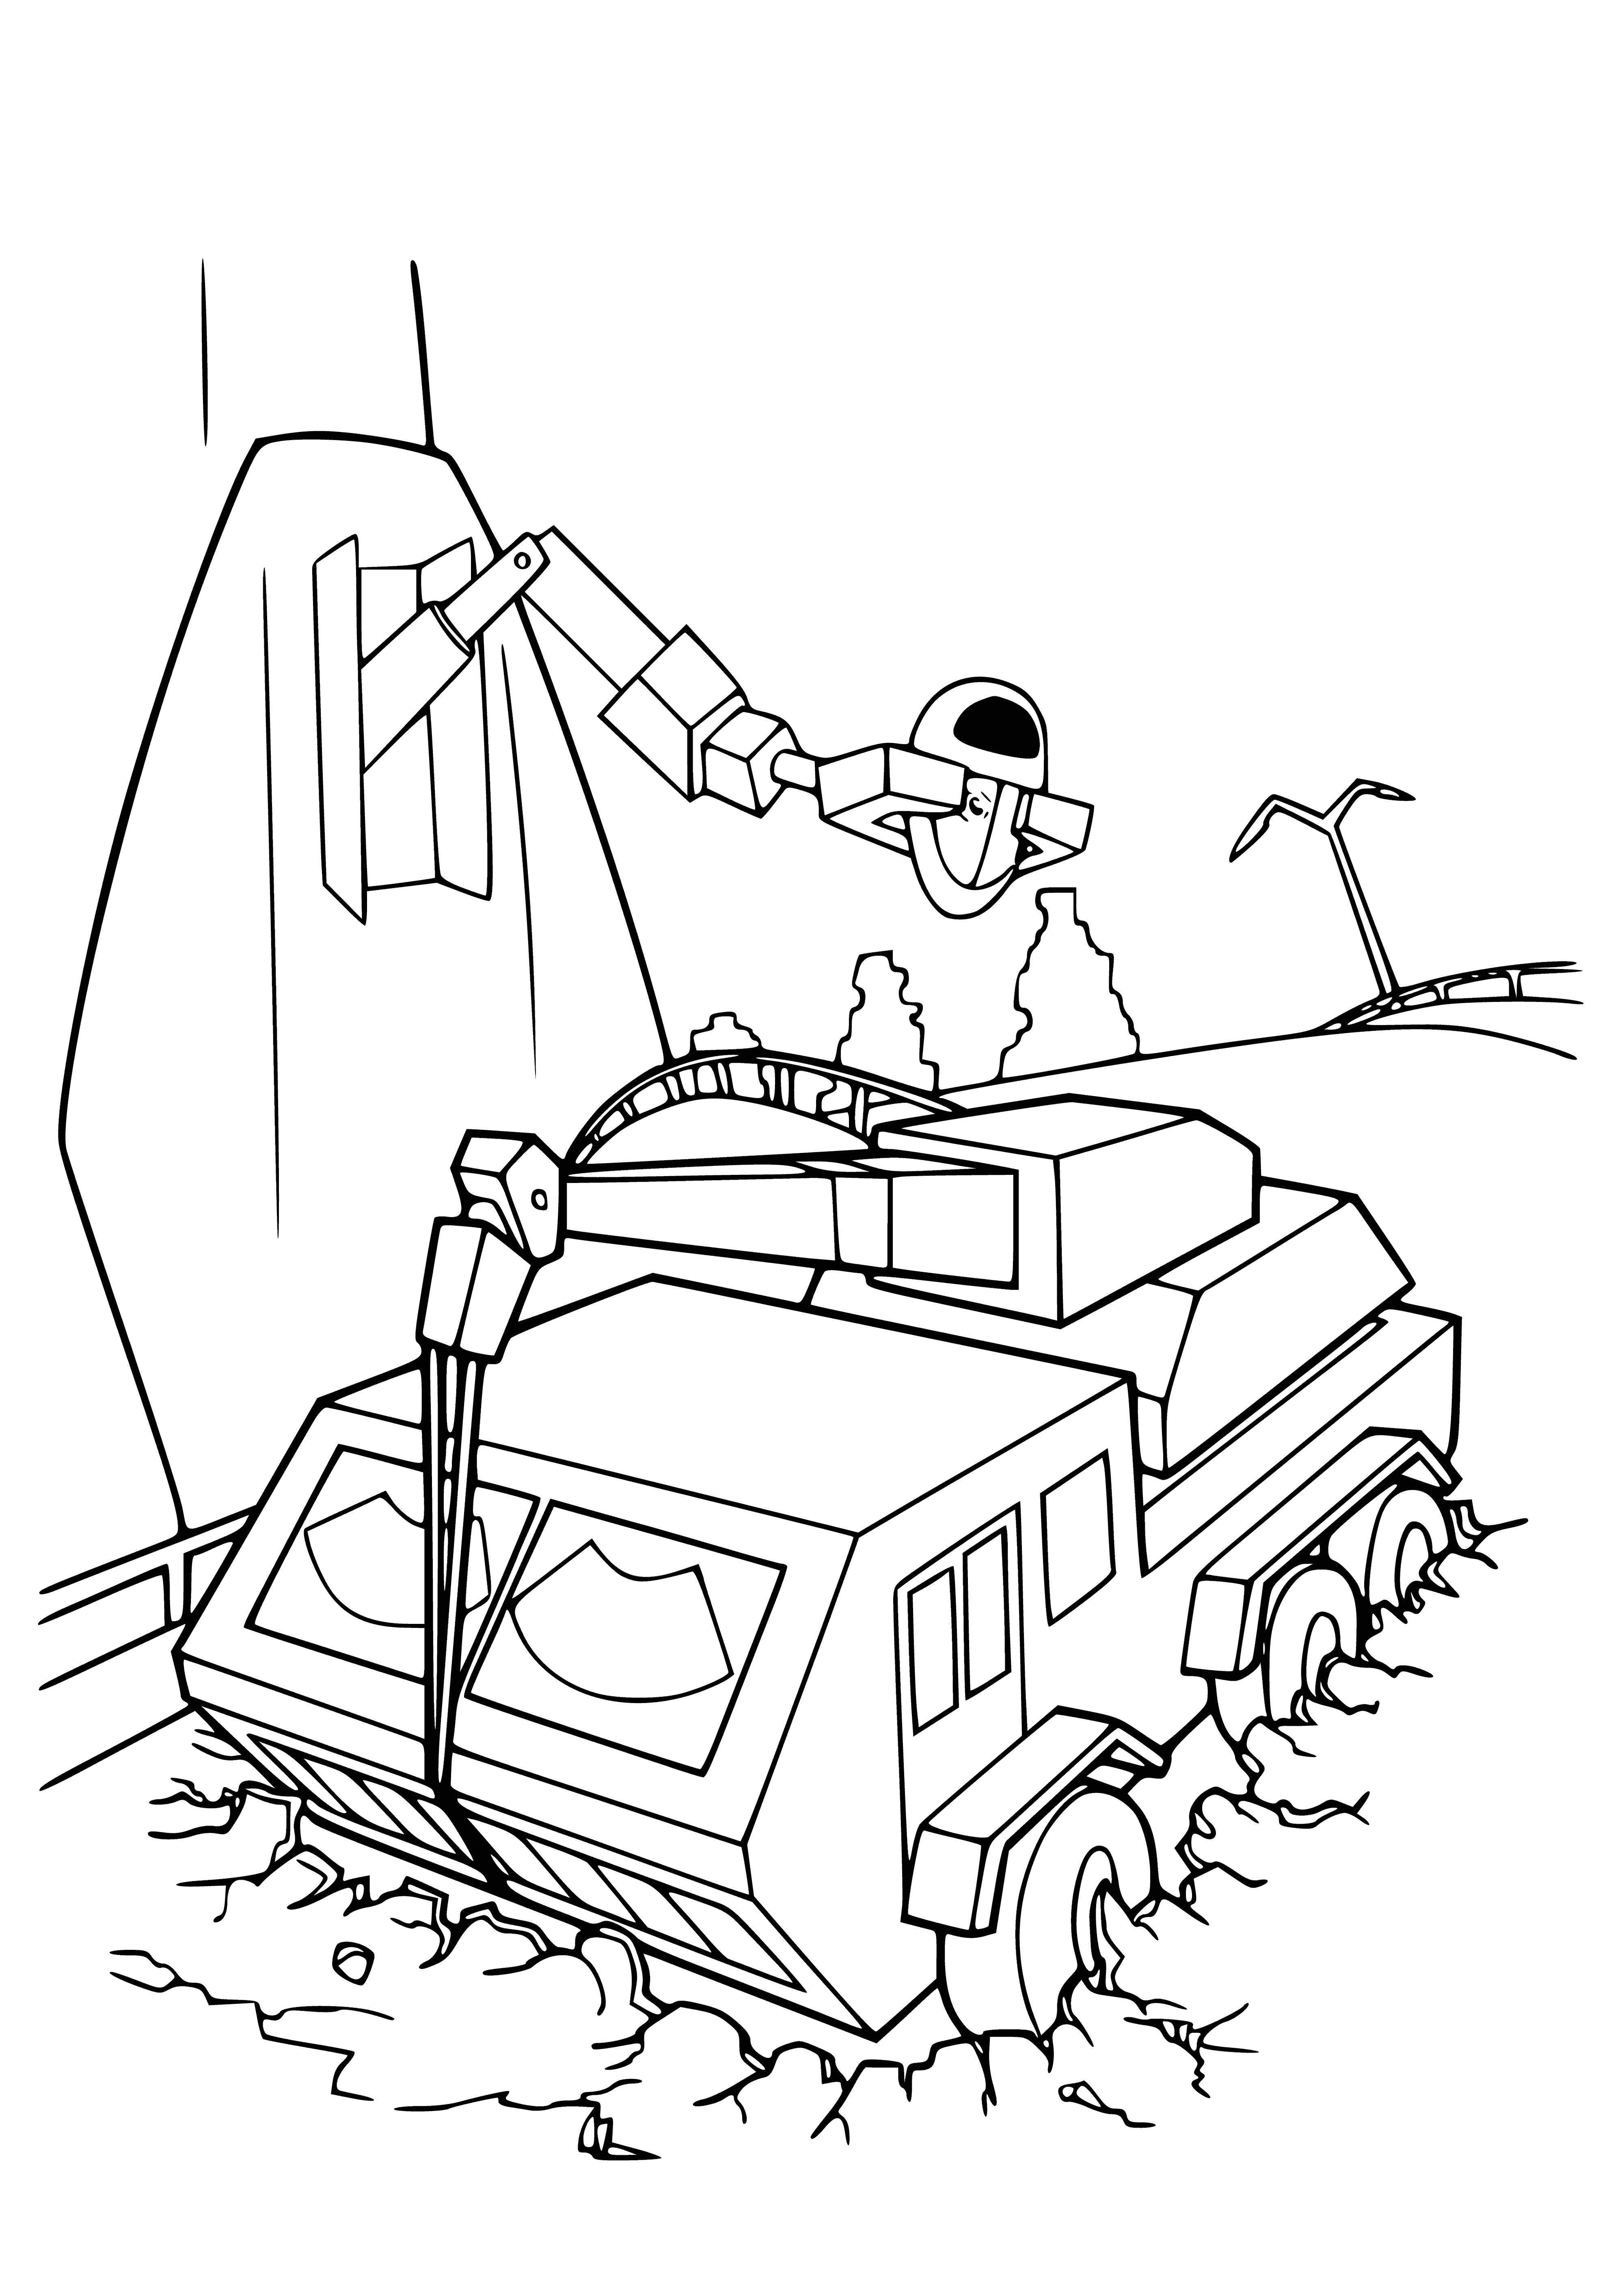 coloring page: A small rectangular robot with metal legs, black eyes, thin arms and 3-fingered claws, walking with its head low.